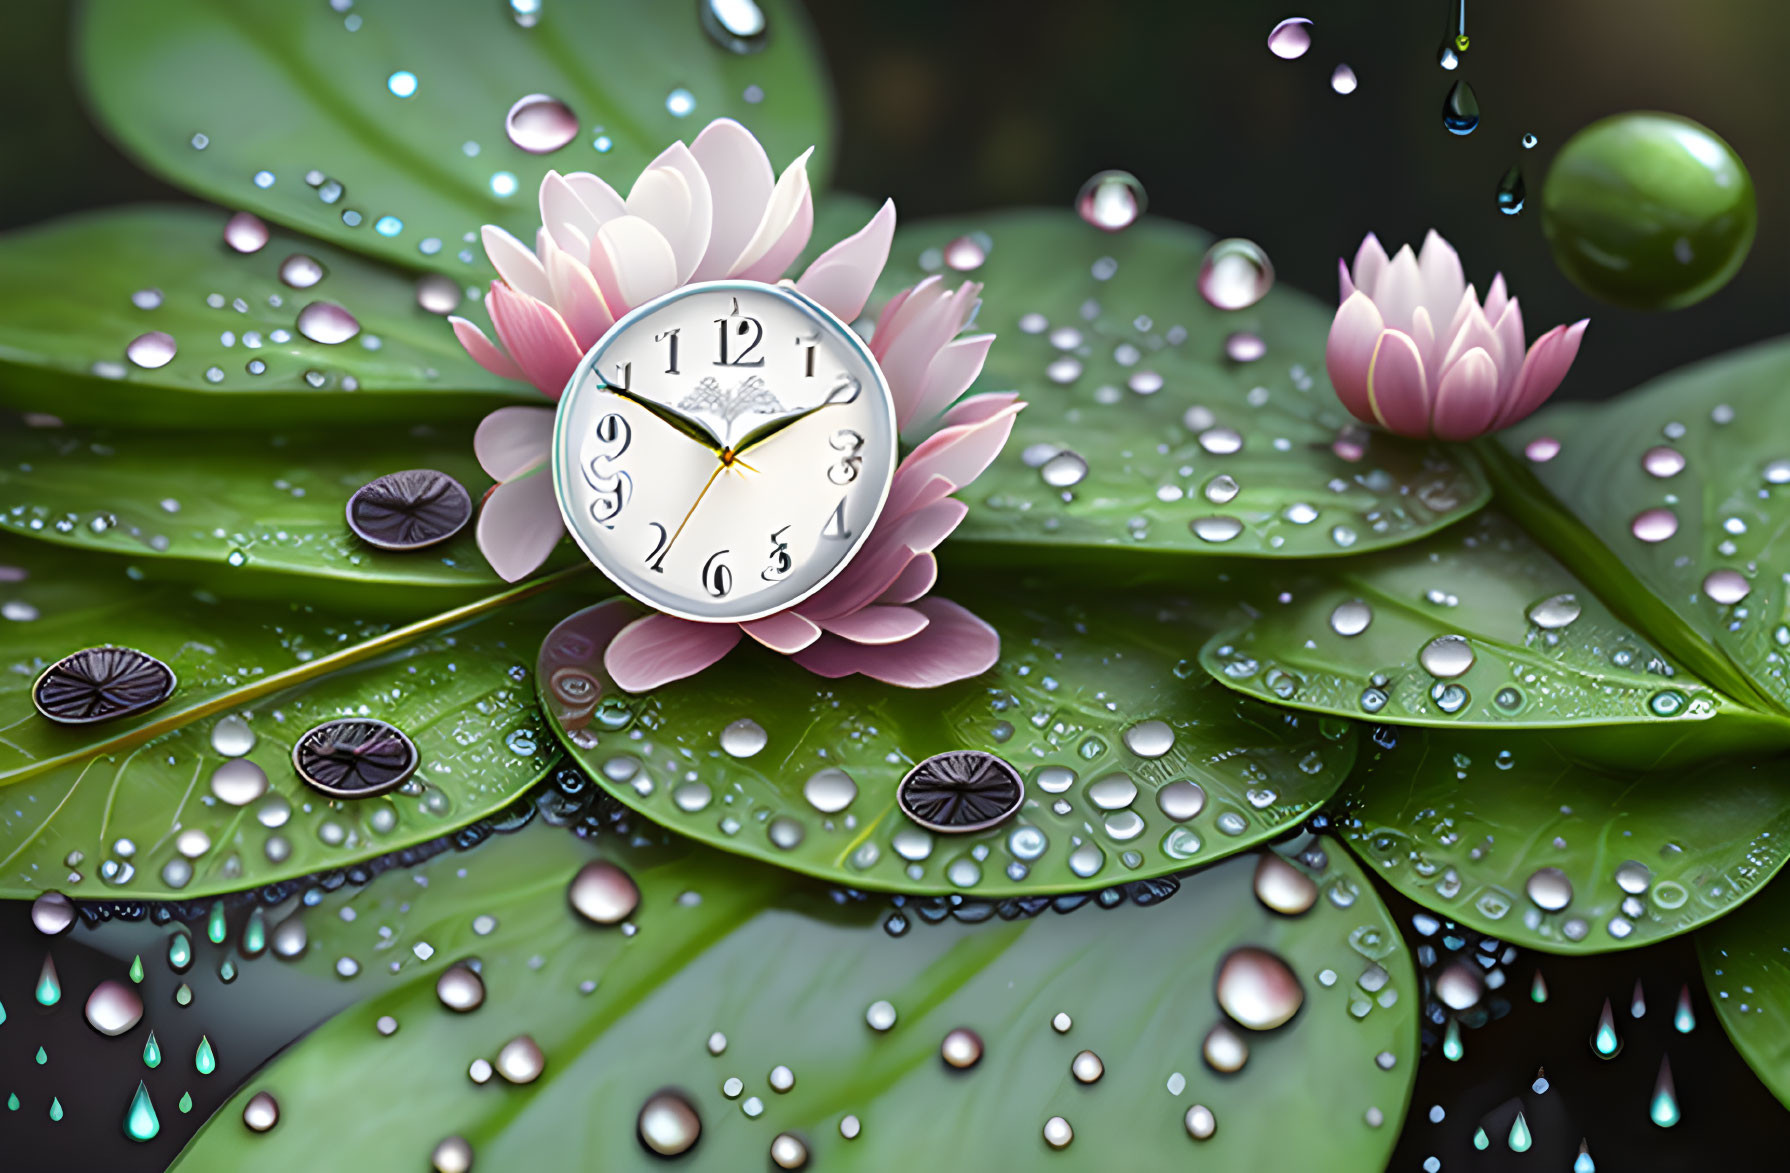 Surreal clock and lotus flower on dew-covered leaves with water droplets